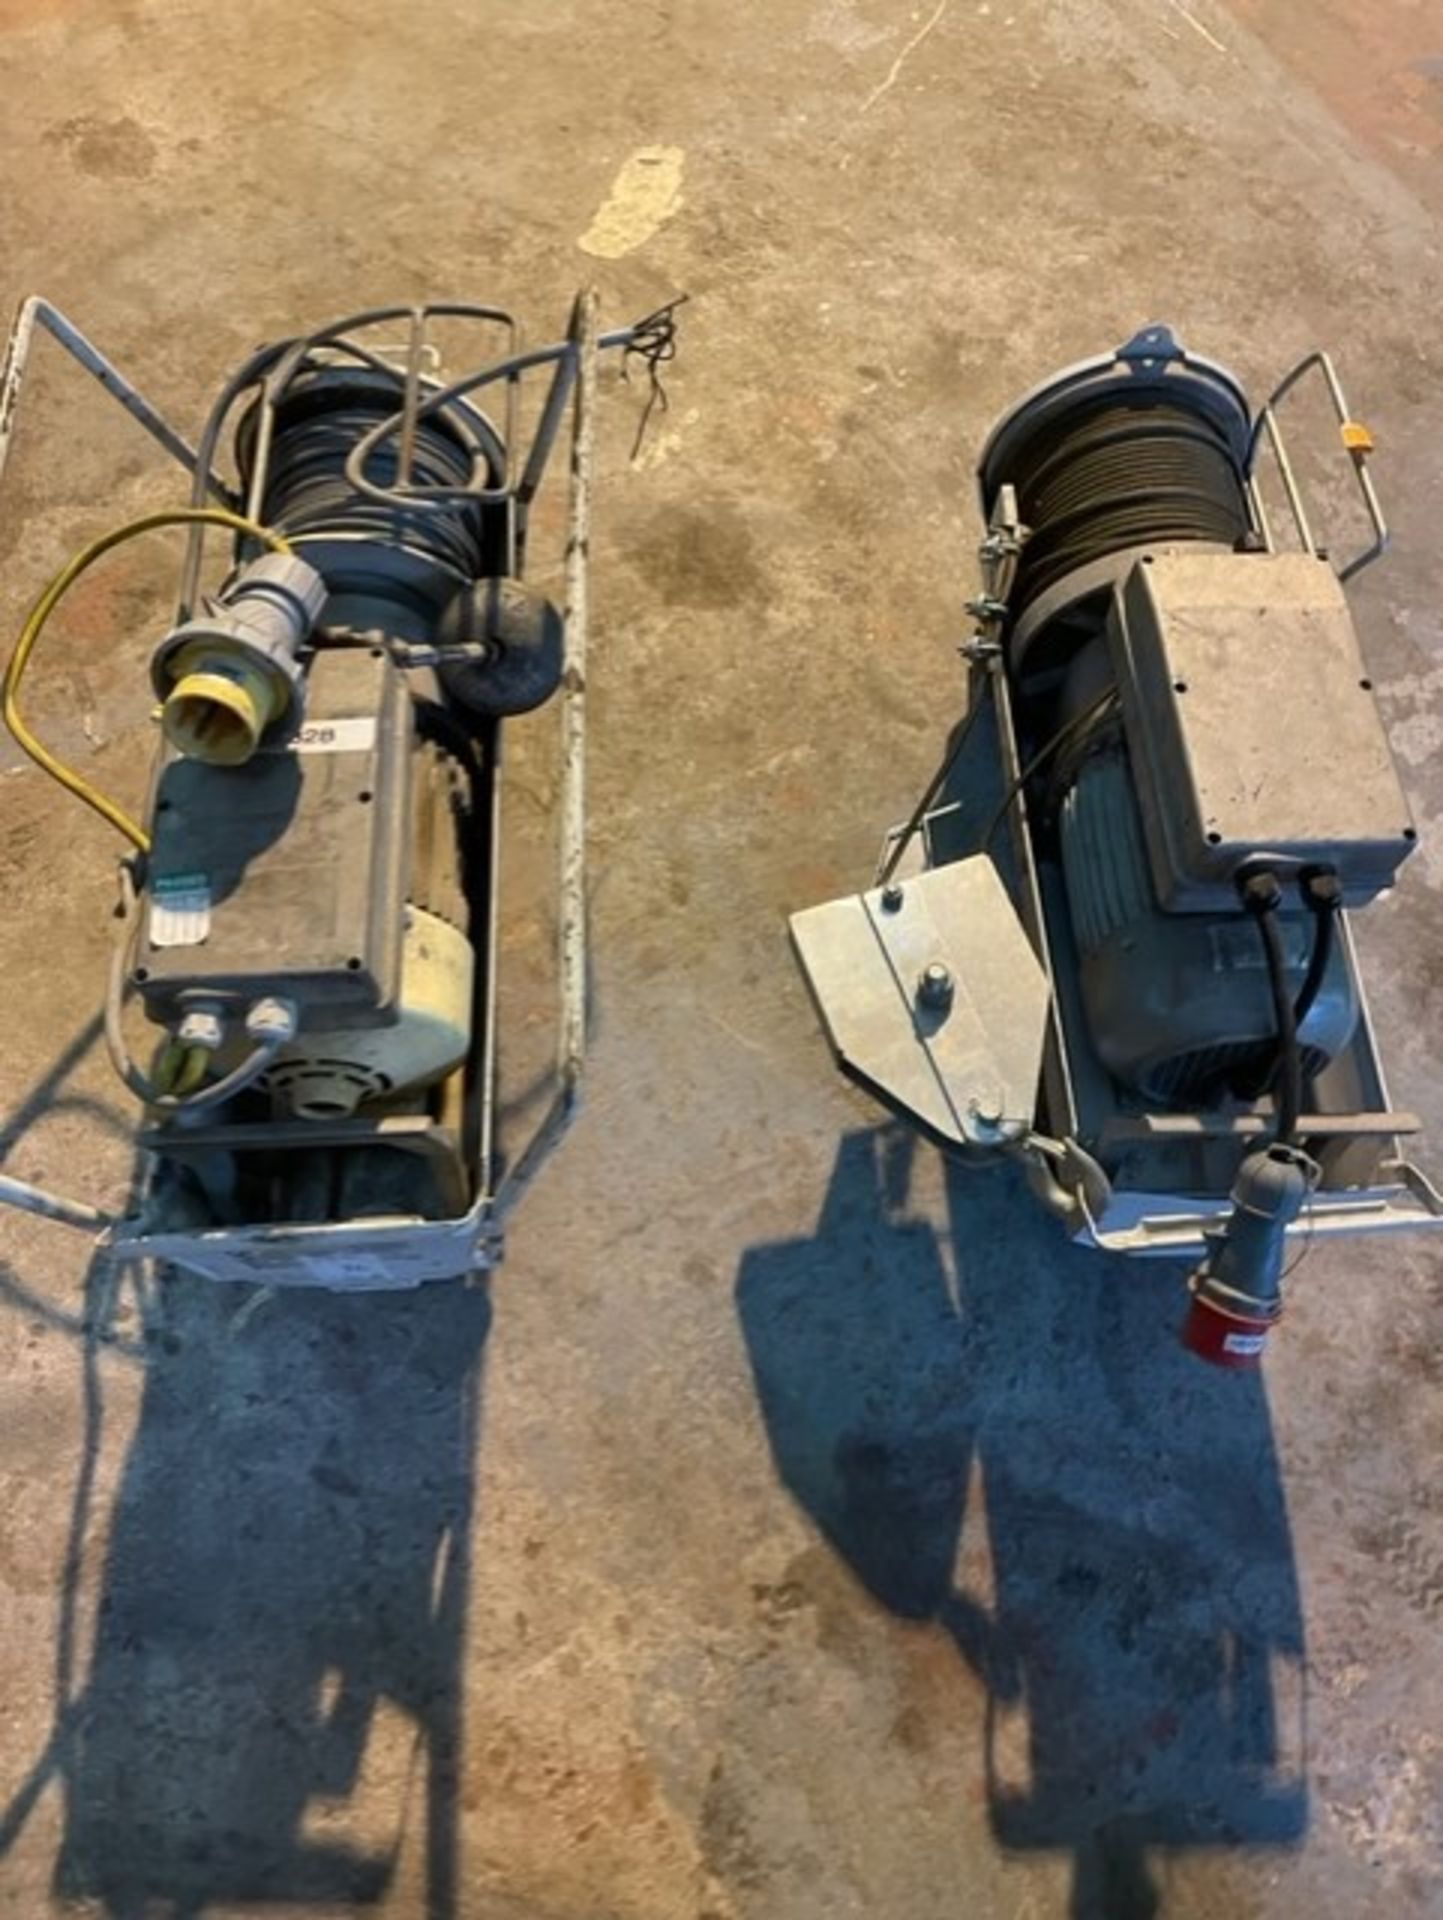 2 x gantry hoists in need of attention one is 110 the other is 415 volts one has pulley